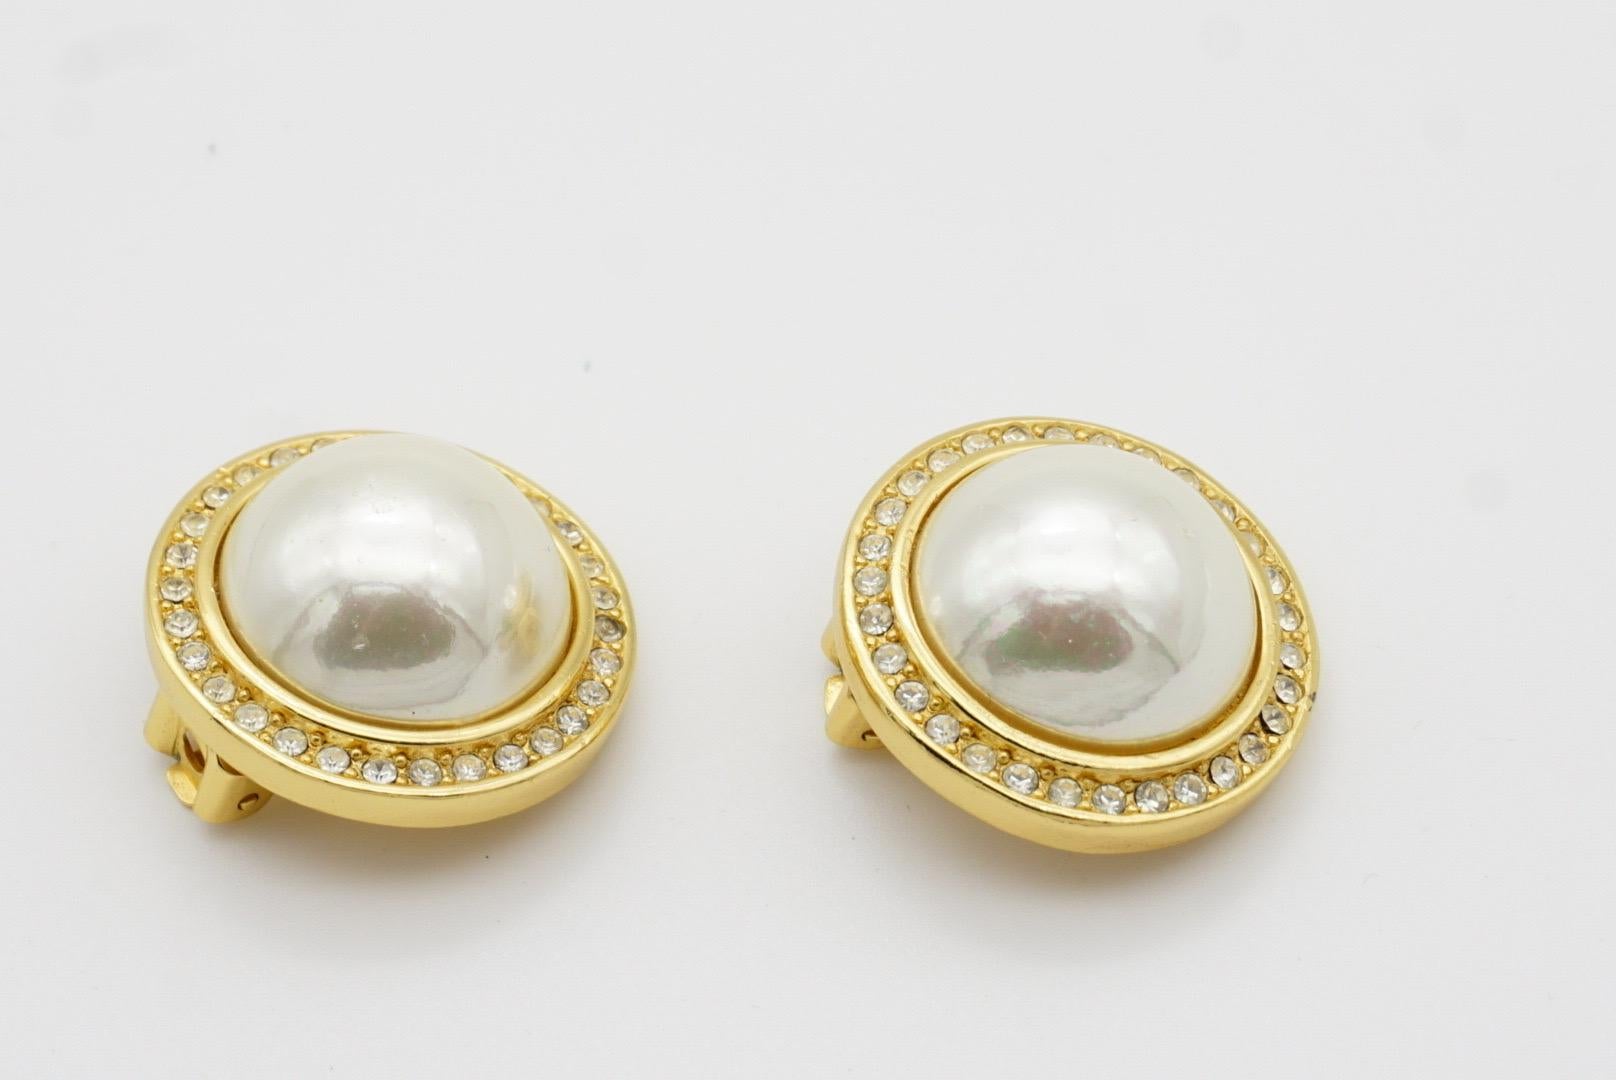 Christian Dior GROSSE 1990 CHC Large Round White Pearl Crystals Clip Earrings For Sale 5